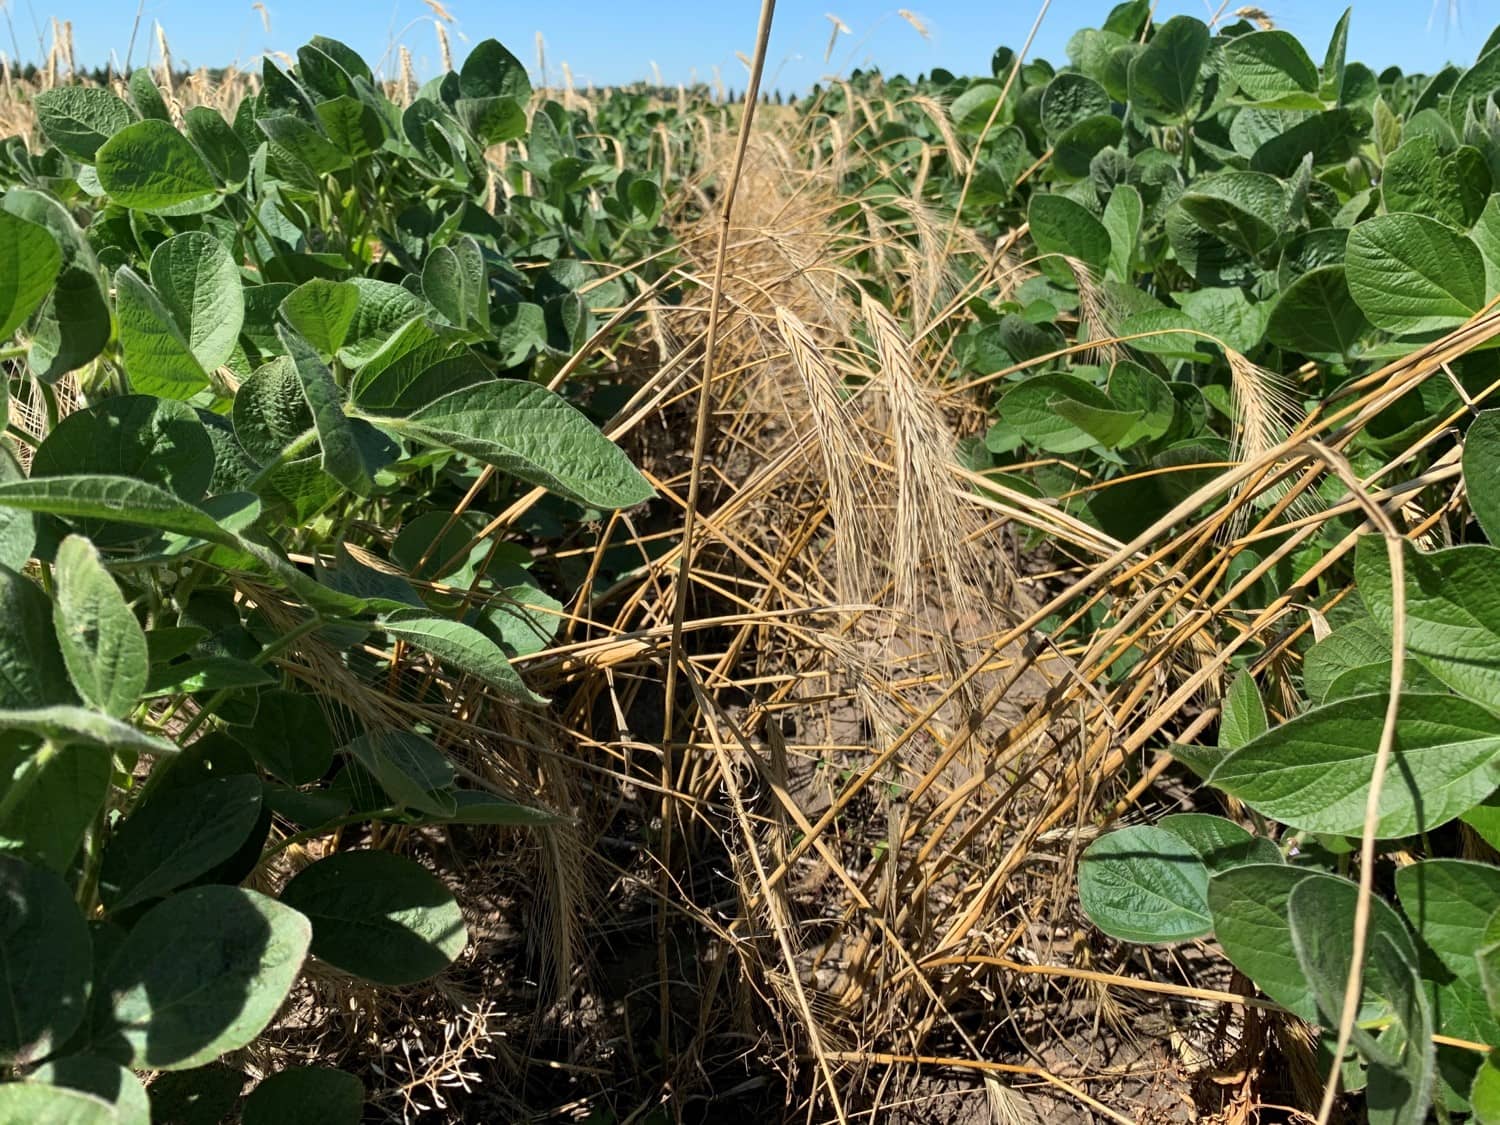 cover-crops-for-soybeans-and-dry-beans-will-be-among-the-topics-during-a-row-crop-tour-at-ndsus-carrington-research-extension-center-ndsu-photo